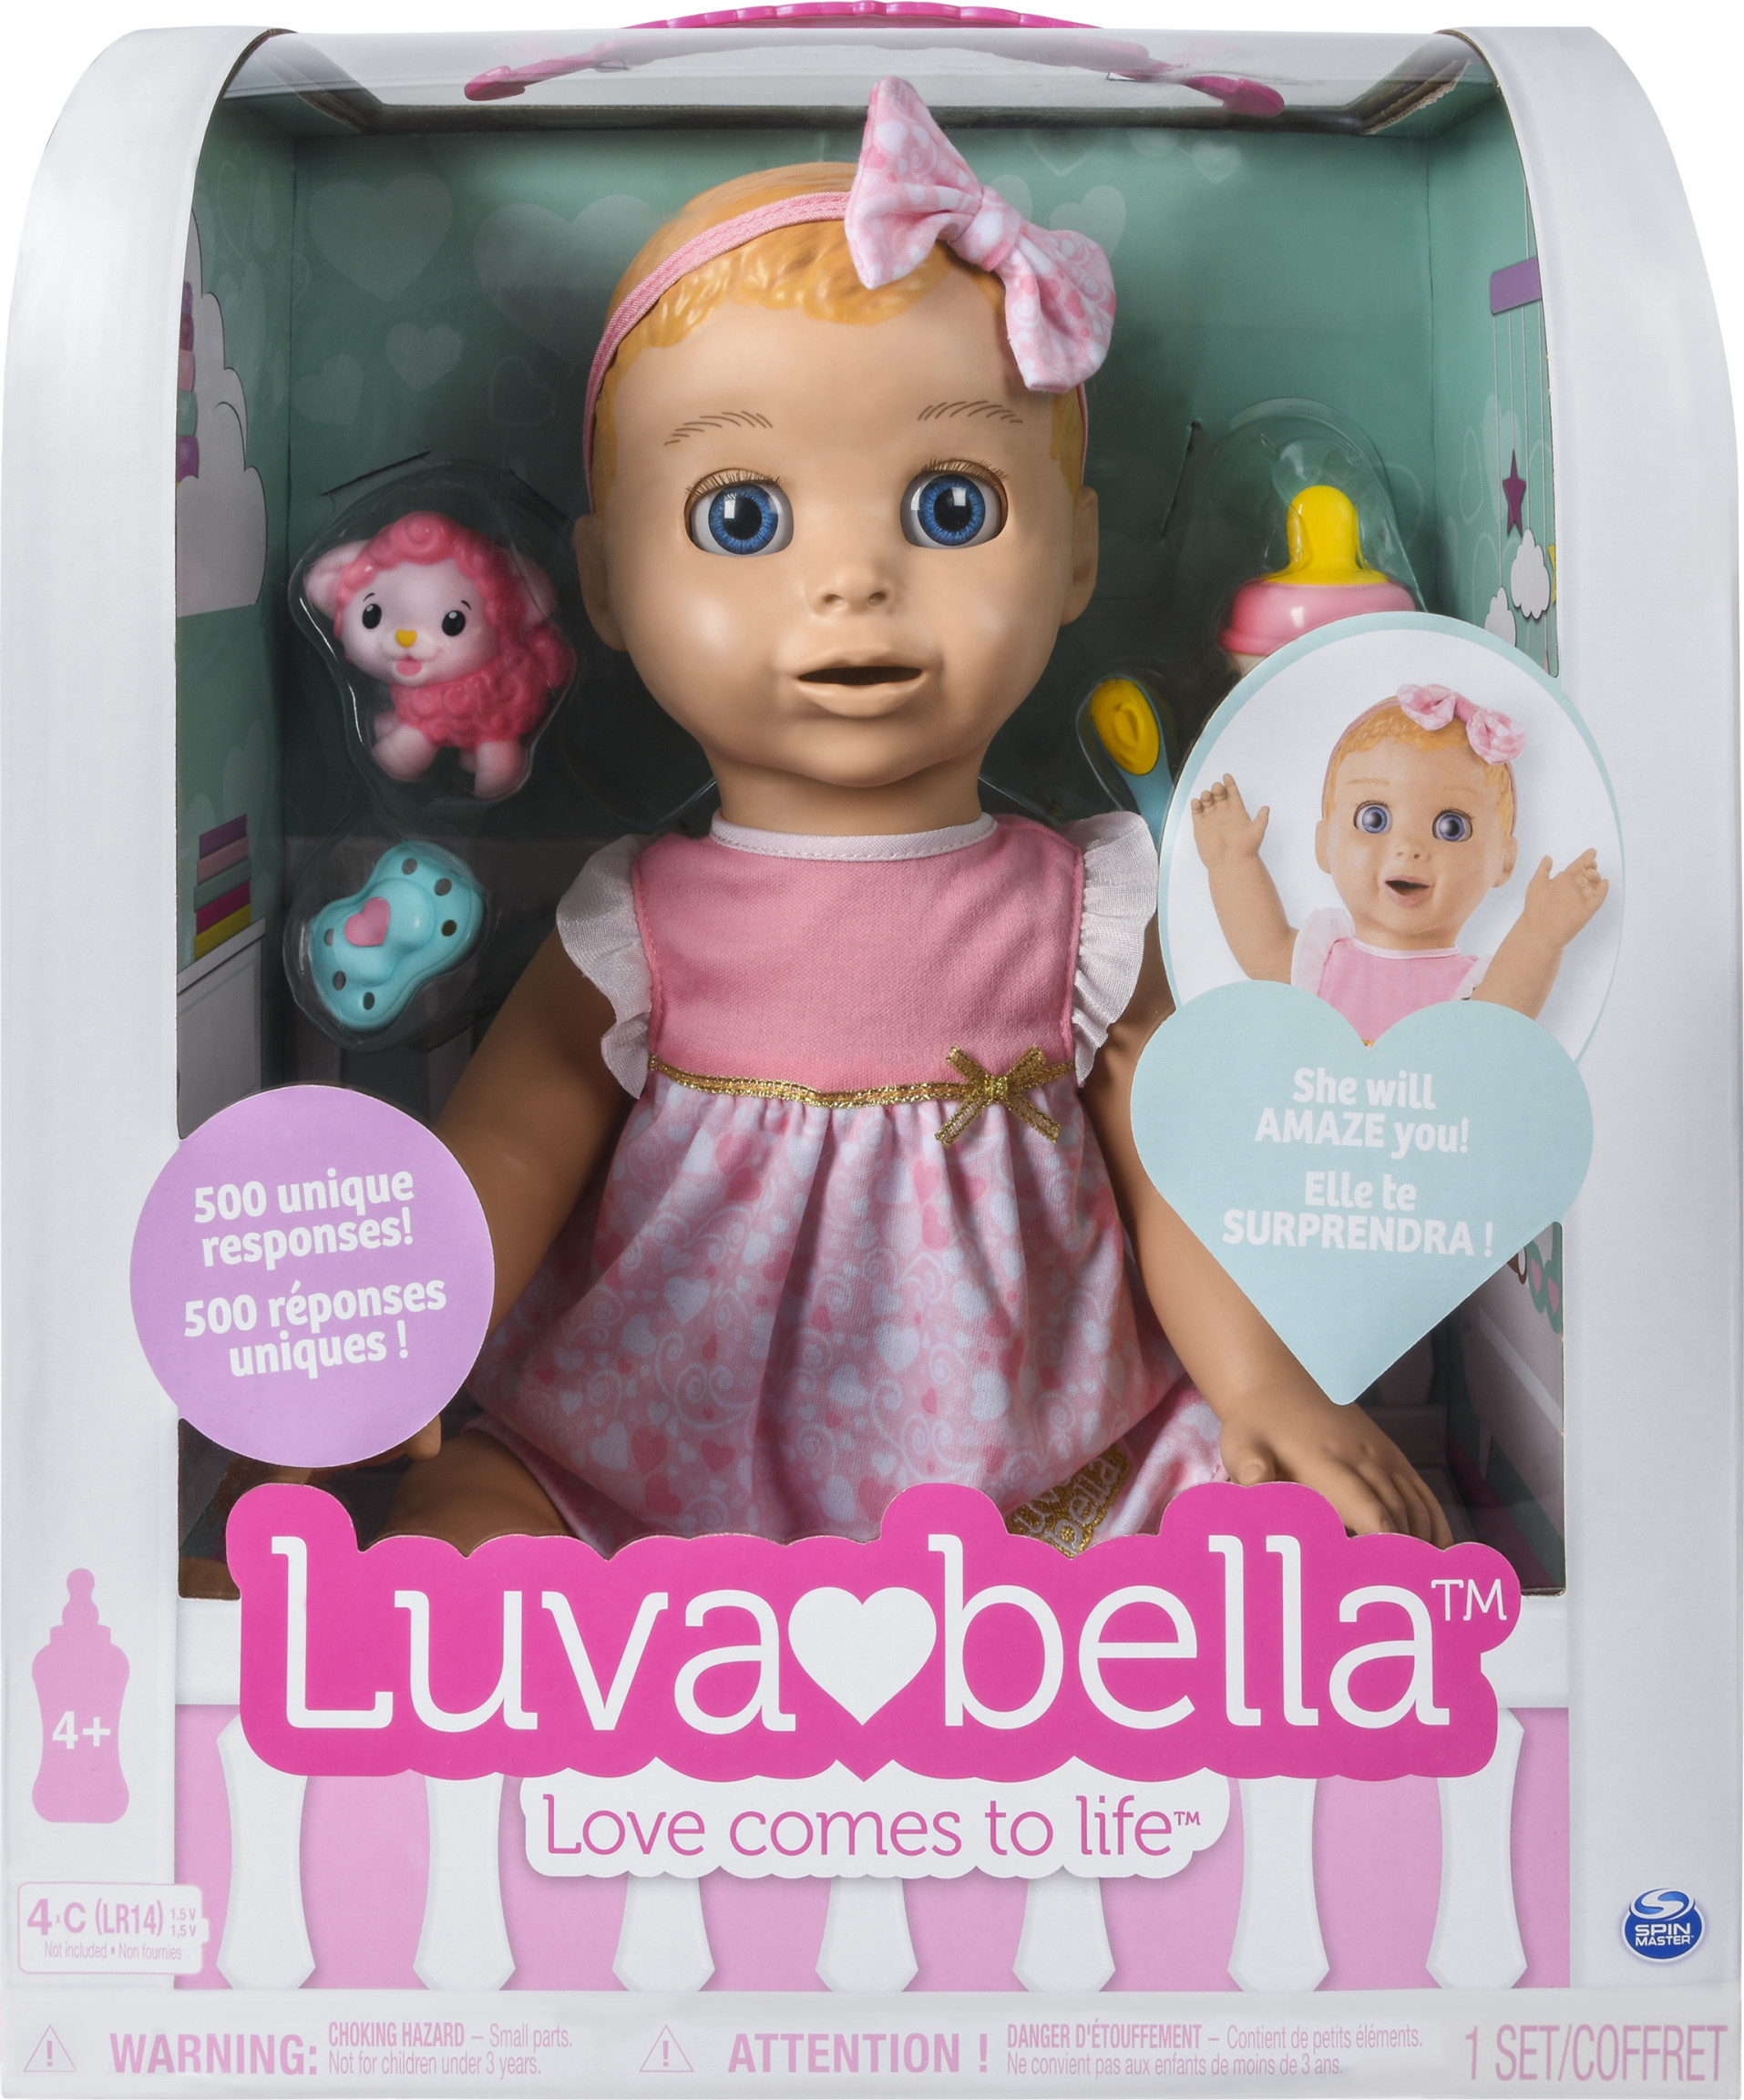 Luvabella Blonde Hair, Responsive Baby Doll with Real Expressions and Movement, for Ages 4 and Up - image 2 of 8